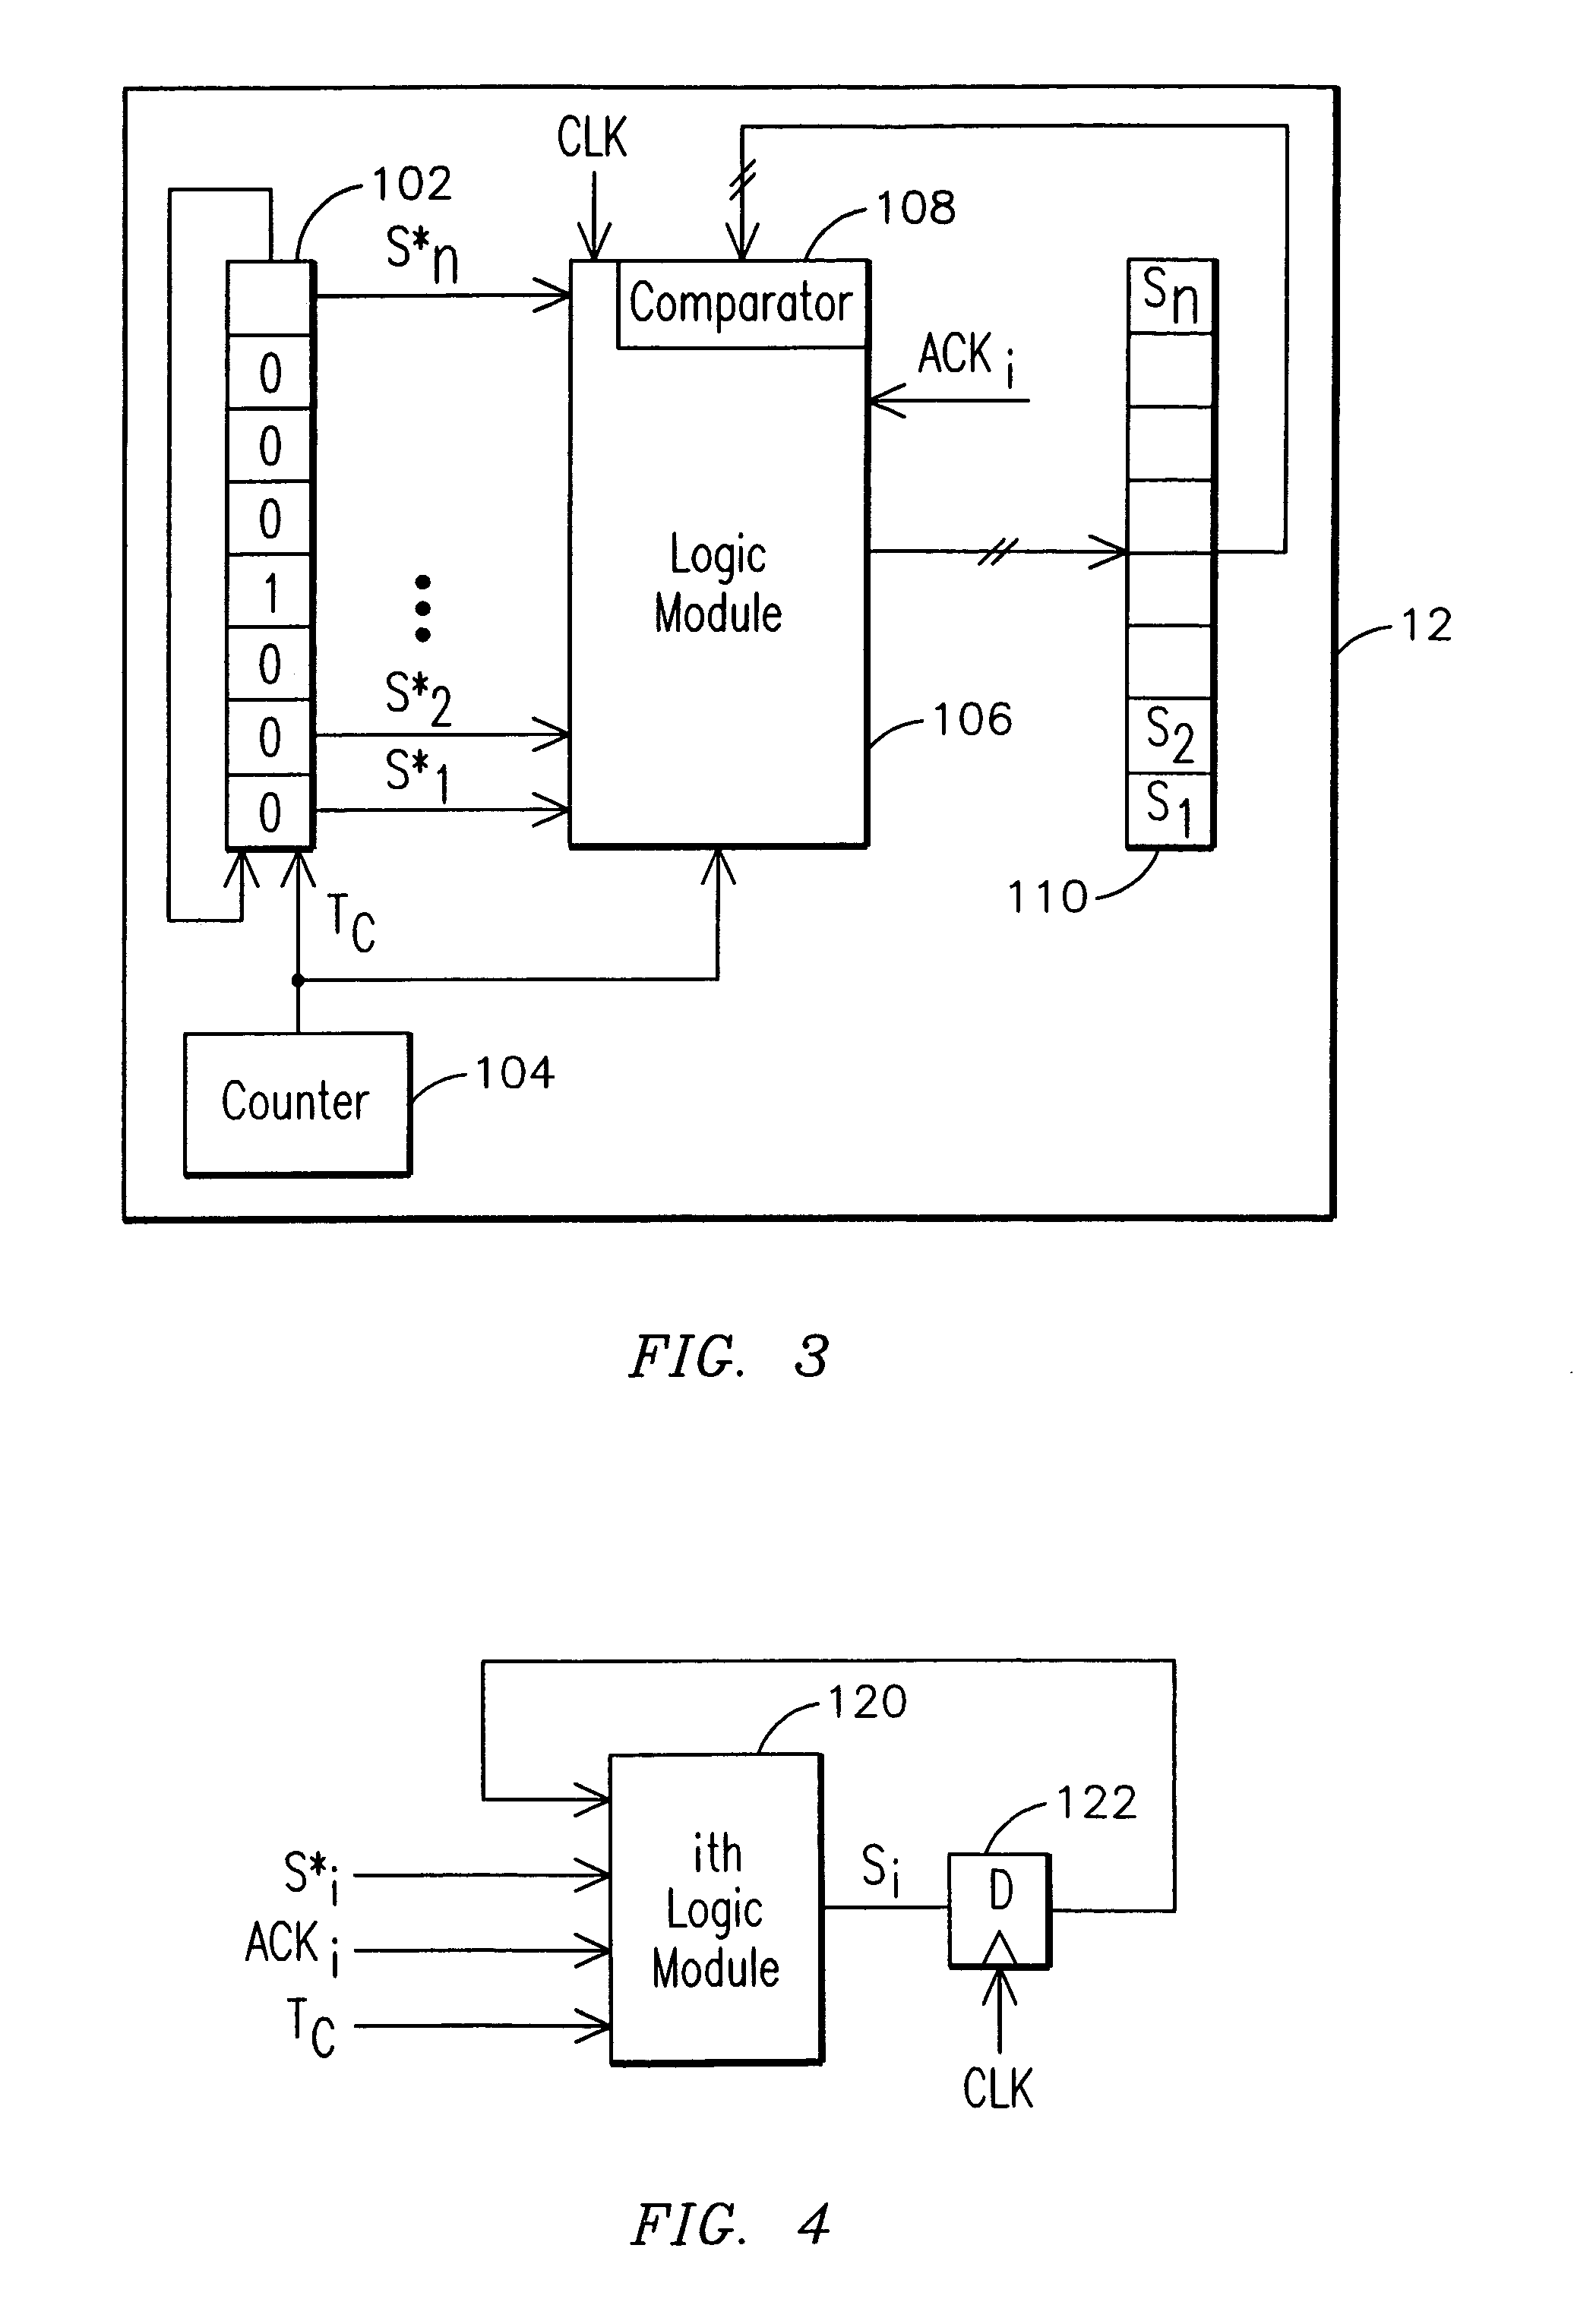 Method and system for asynchronously transferring data